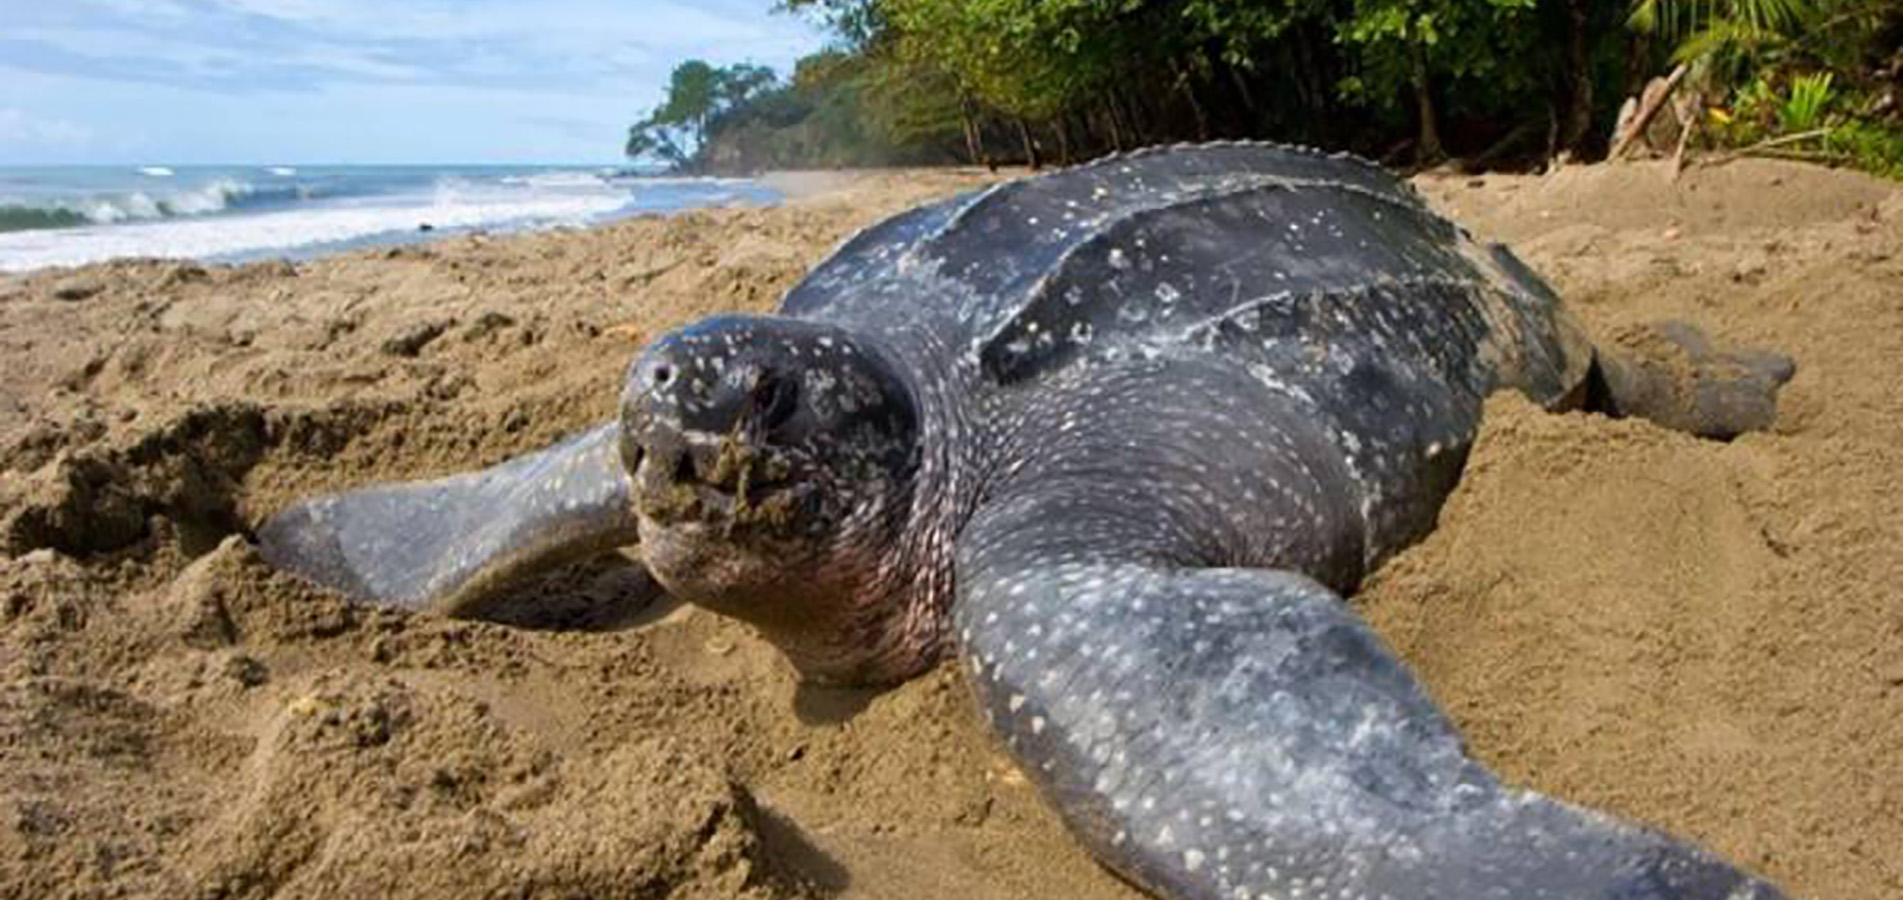 marine turtle of Kribi in the South of Cameroon